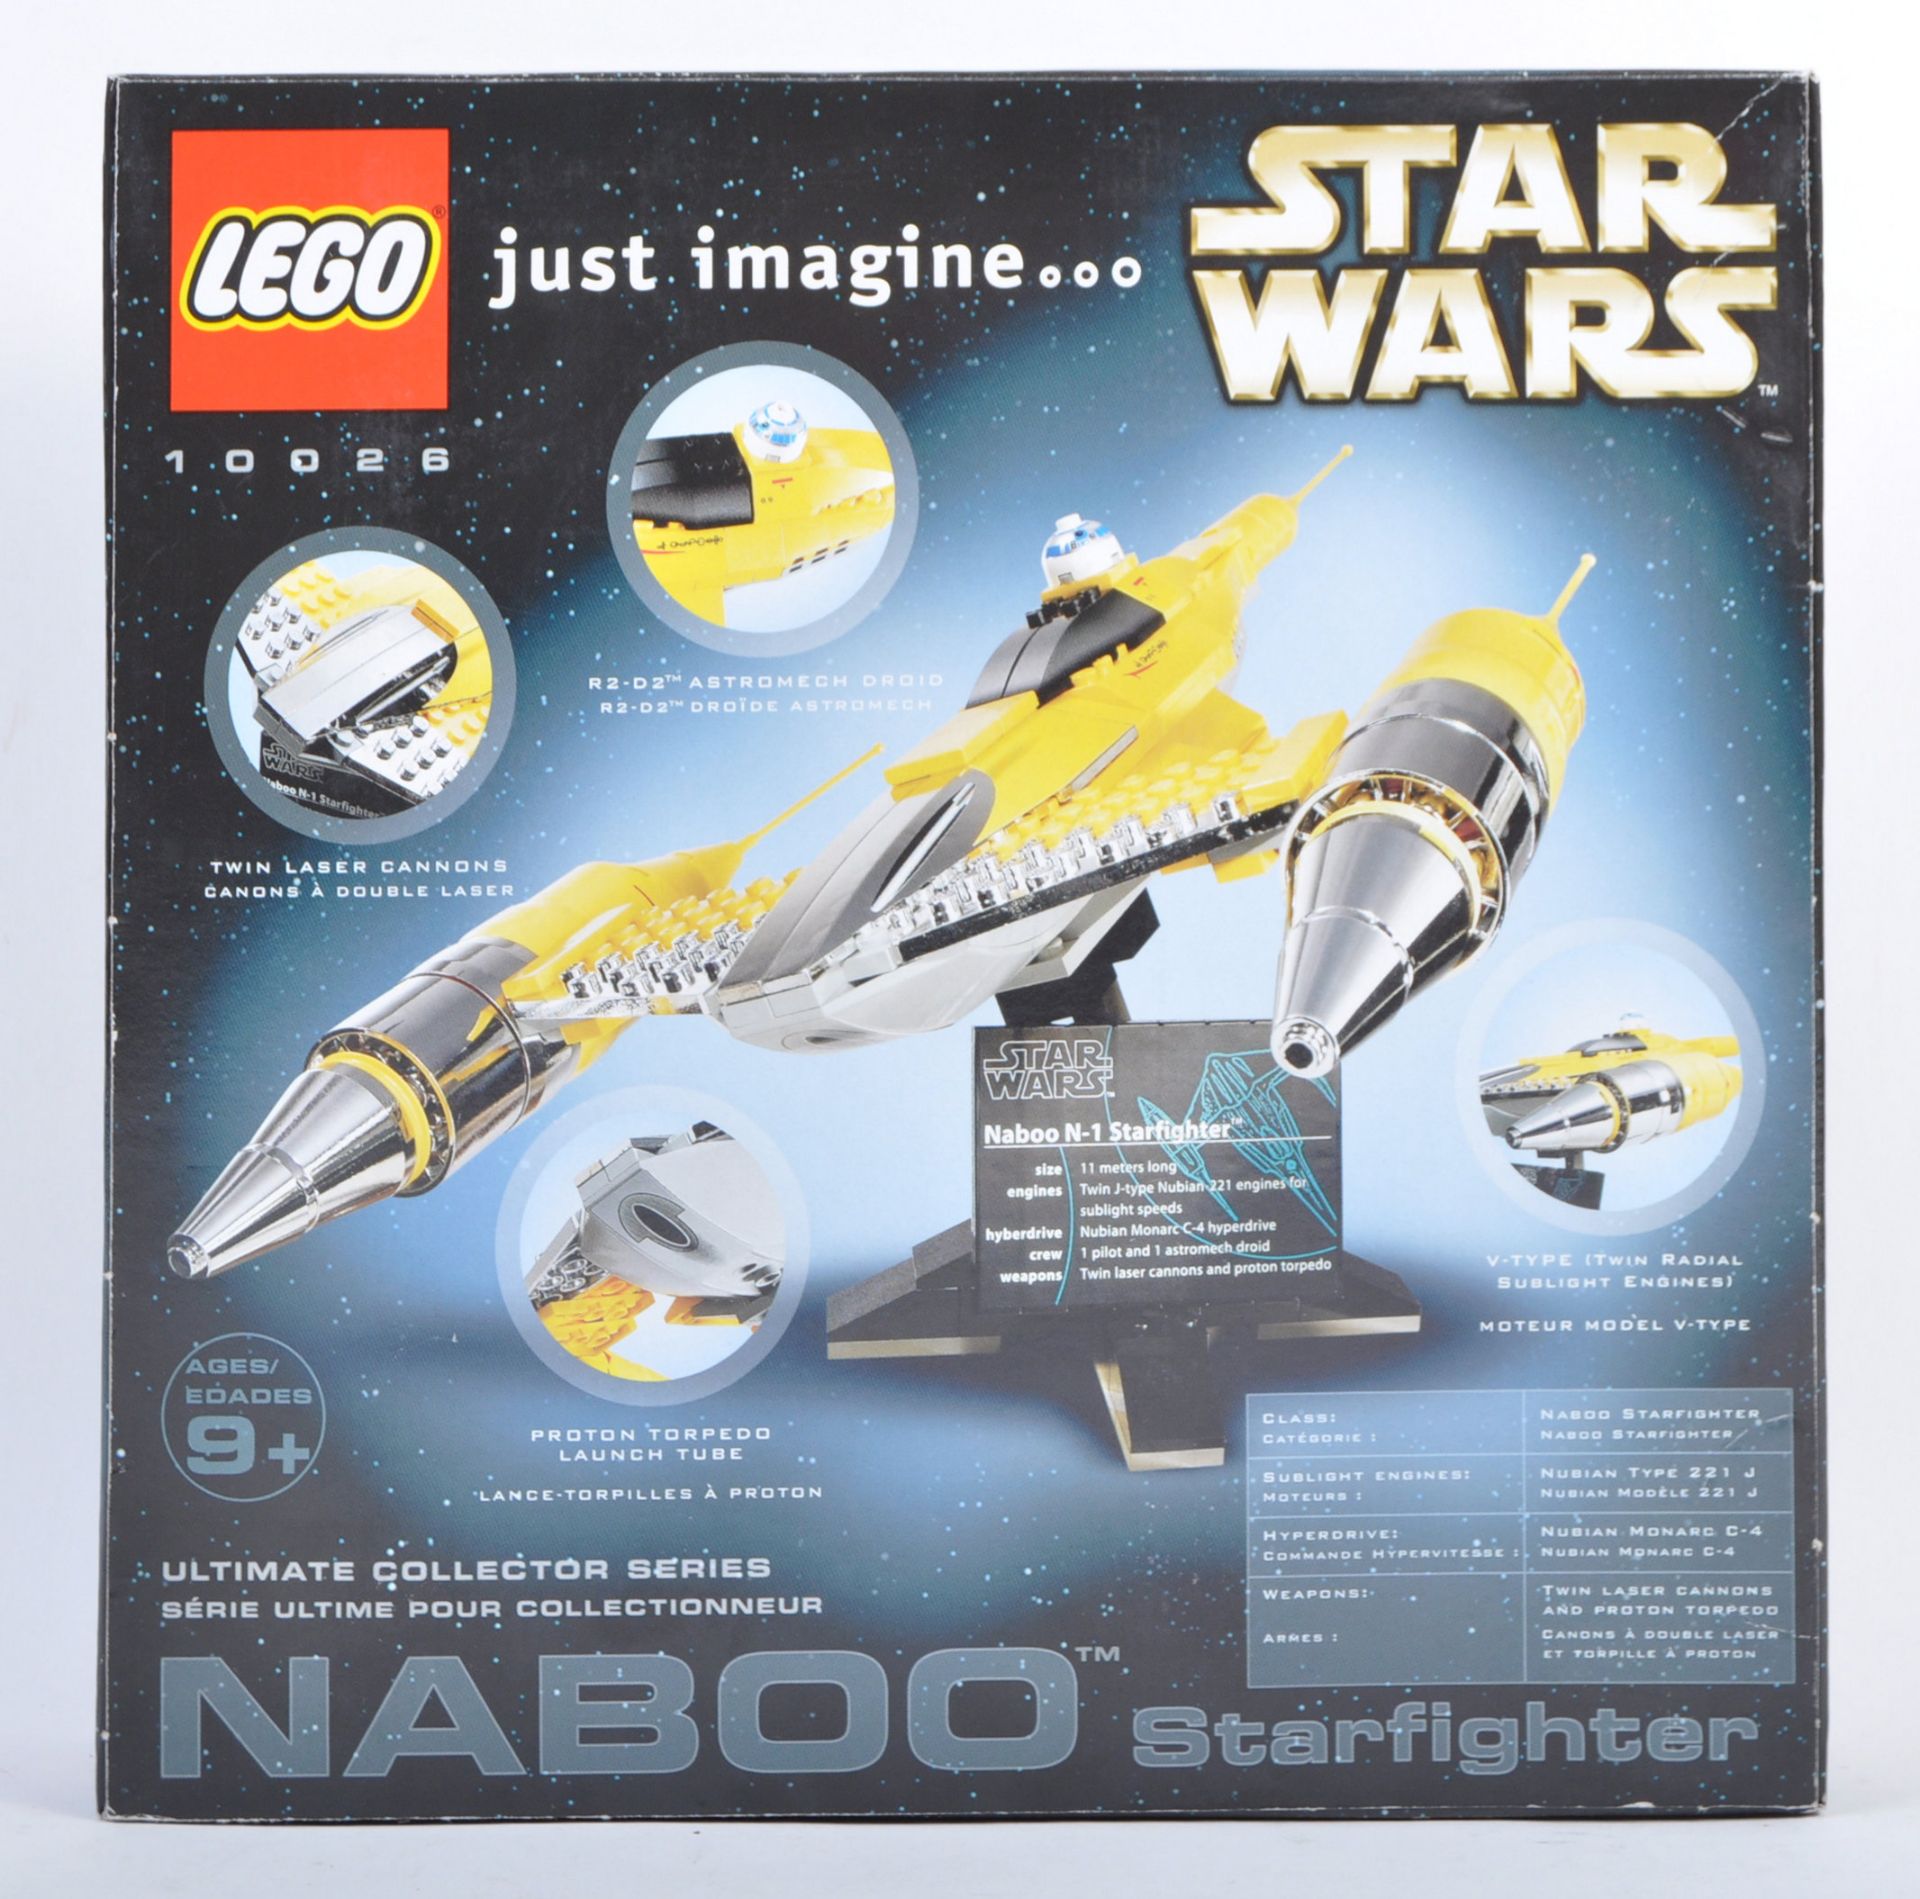 LEGO SET - STAR WARS ULTIMATE COLLECTOR SERIES - 10026 - Image 2 of 4